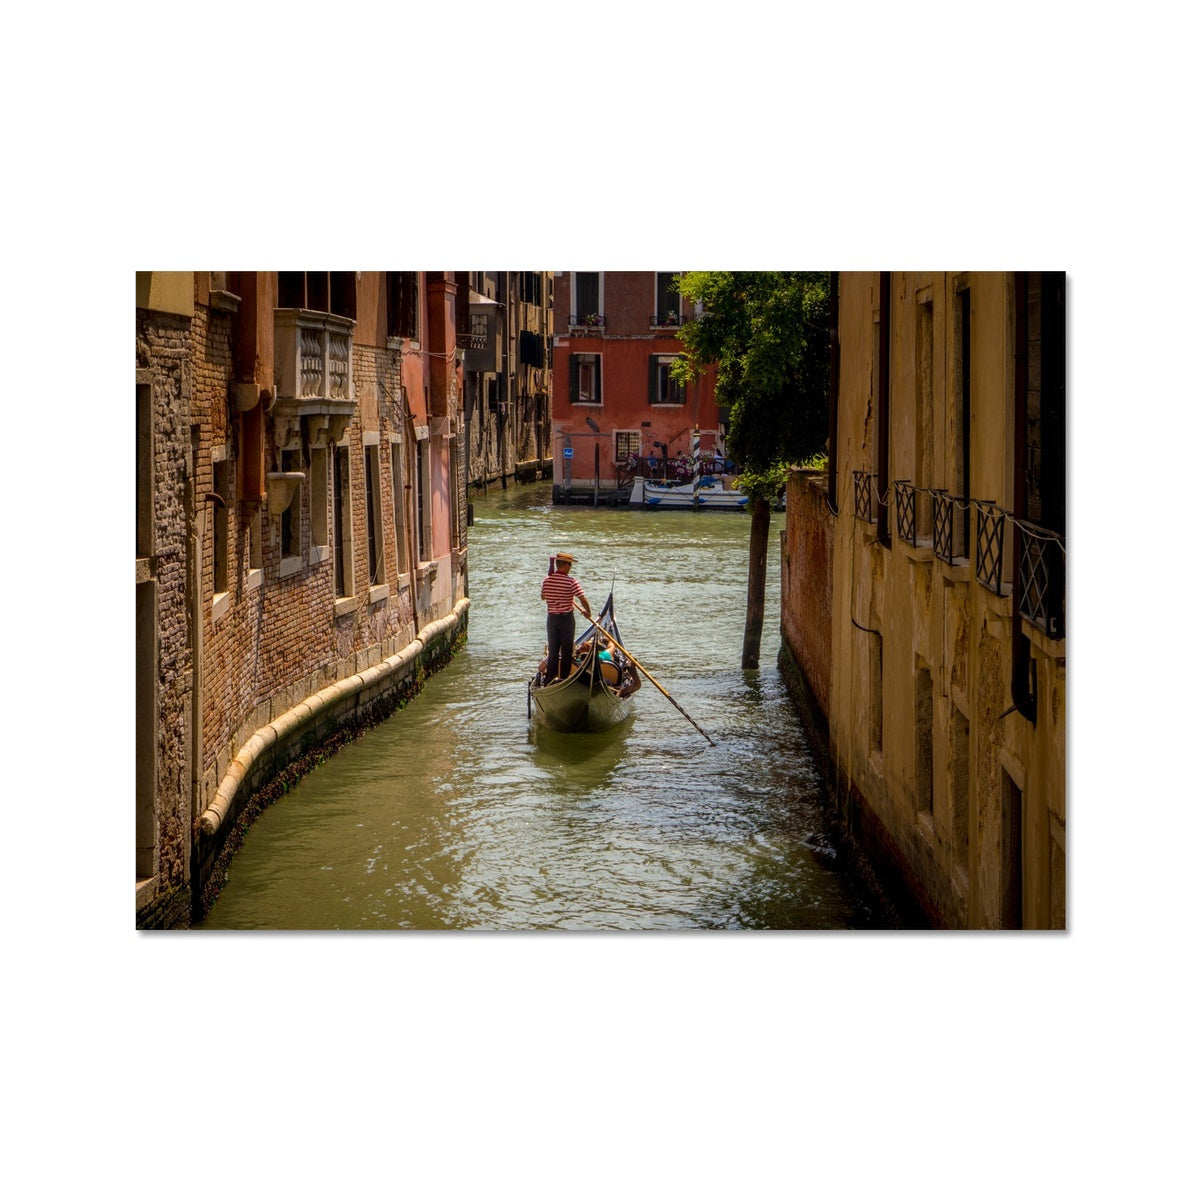 Gondola with gondolier wearing a traditional boater hat and striped top on a  canal in Venice. Italy. Fine Art Print